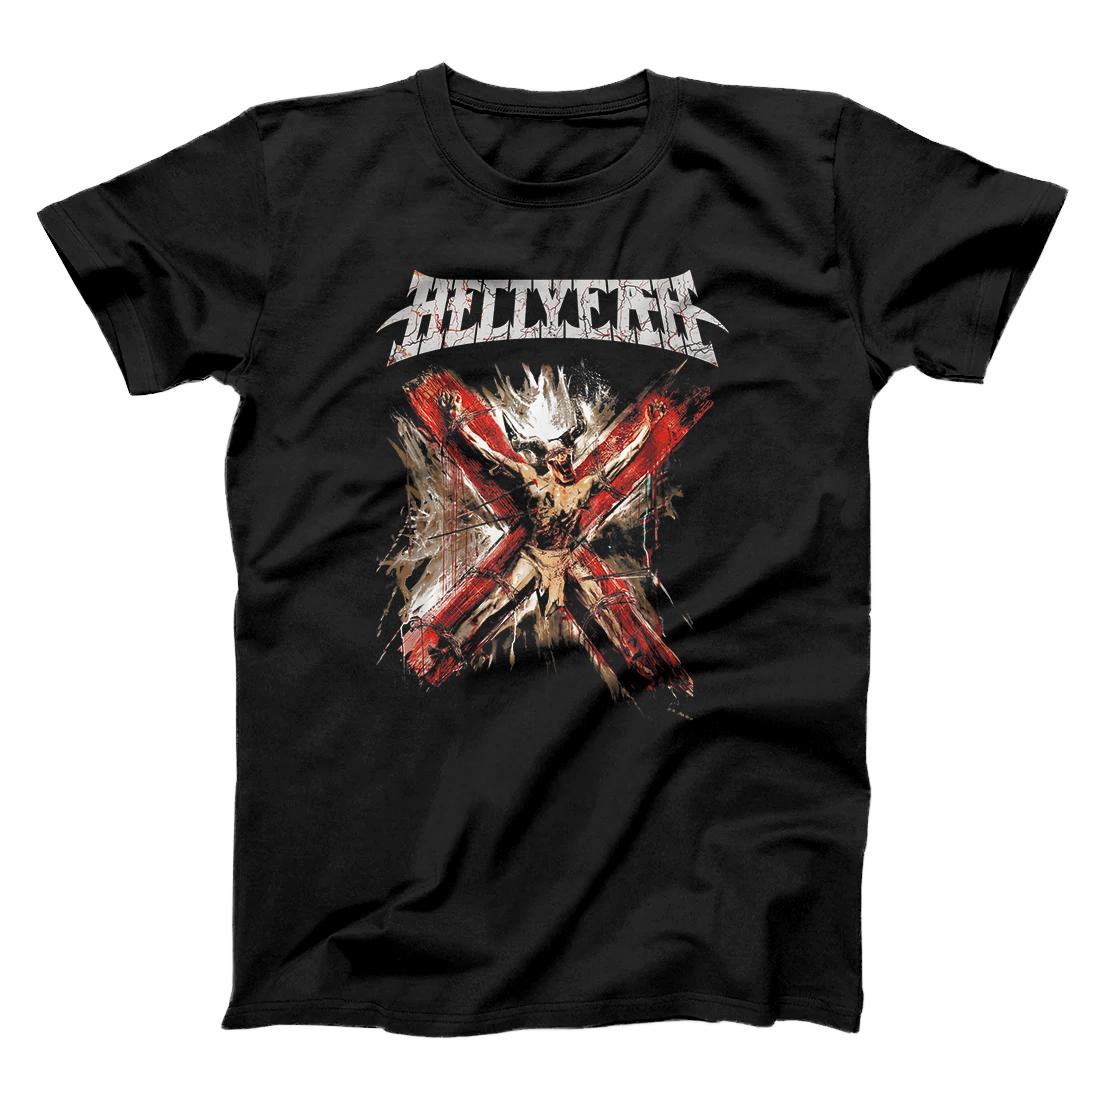 Personalized Hellyeah- Metalhead - Official Merchandise T-Shirt